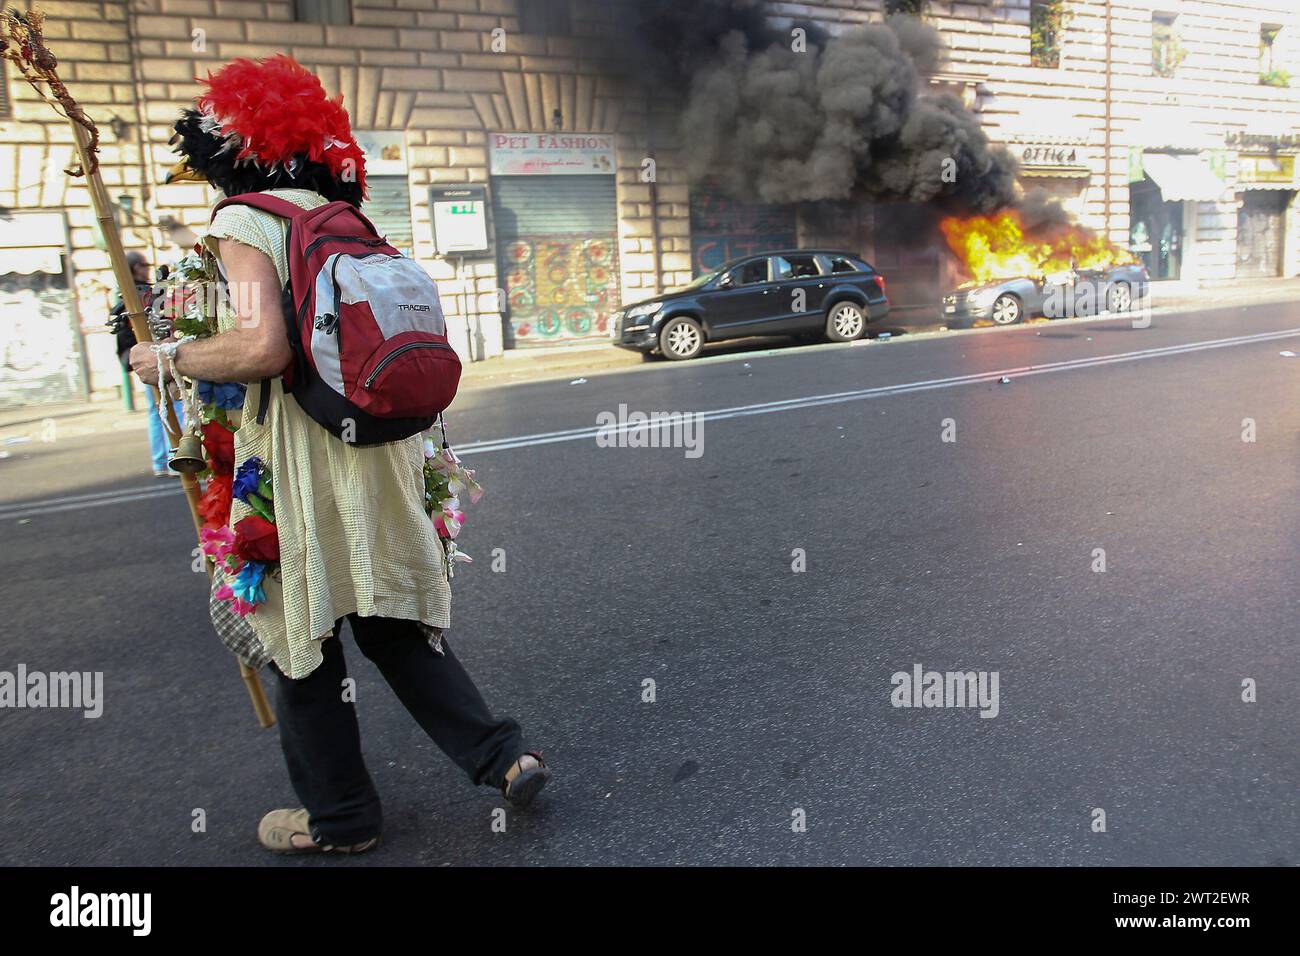 A protester looks at a car burned by the Black Bloc during a demonstration in Rome Stock Photo